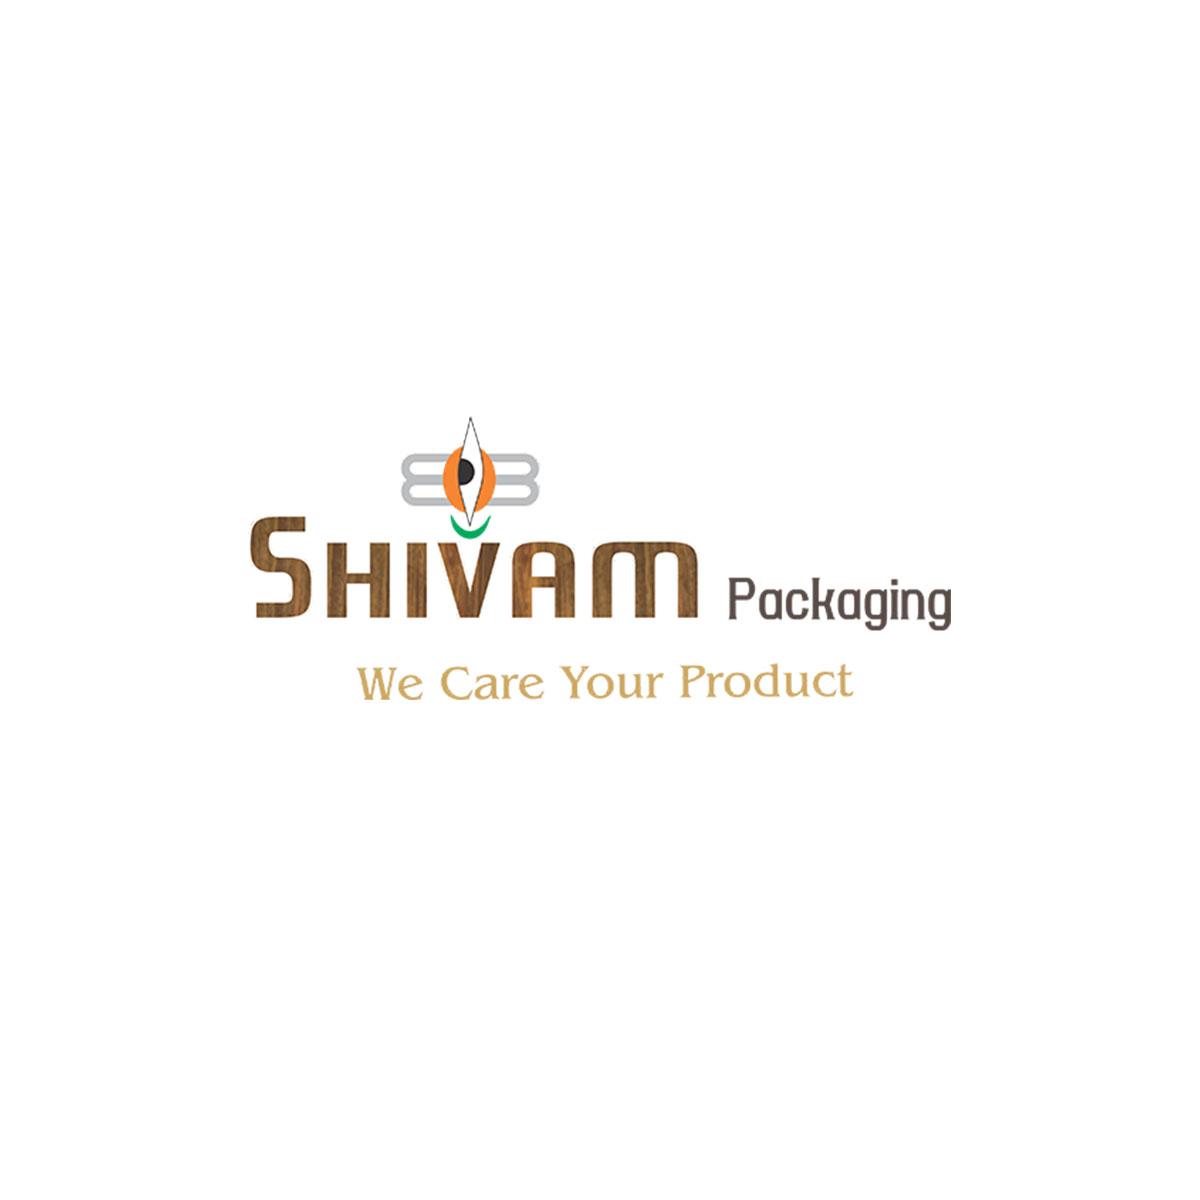 Shivam Packaging - Wooden Pallets Manufacturer In Ahmedabad, India